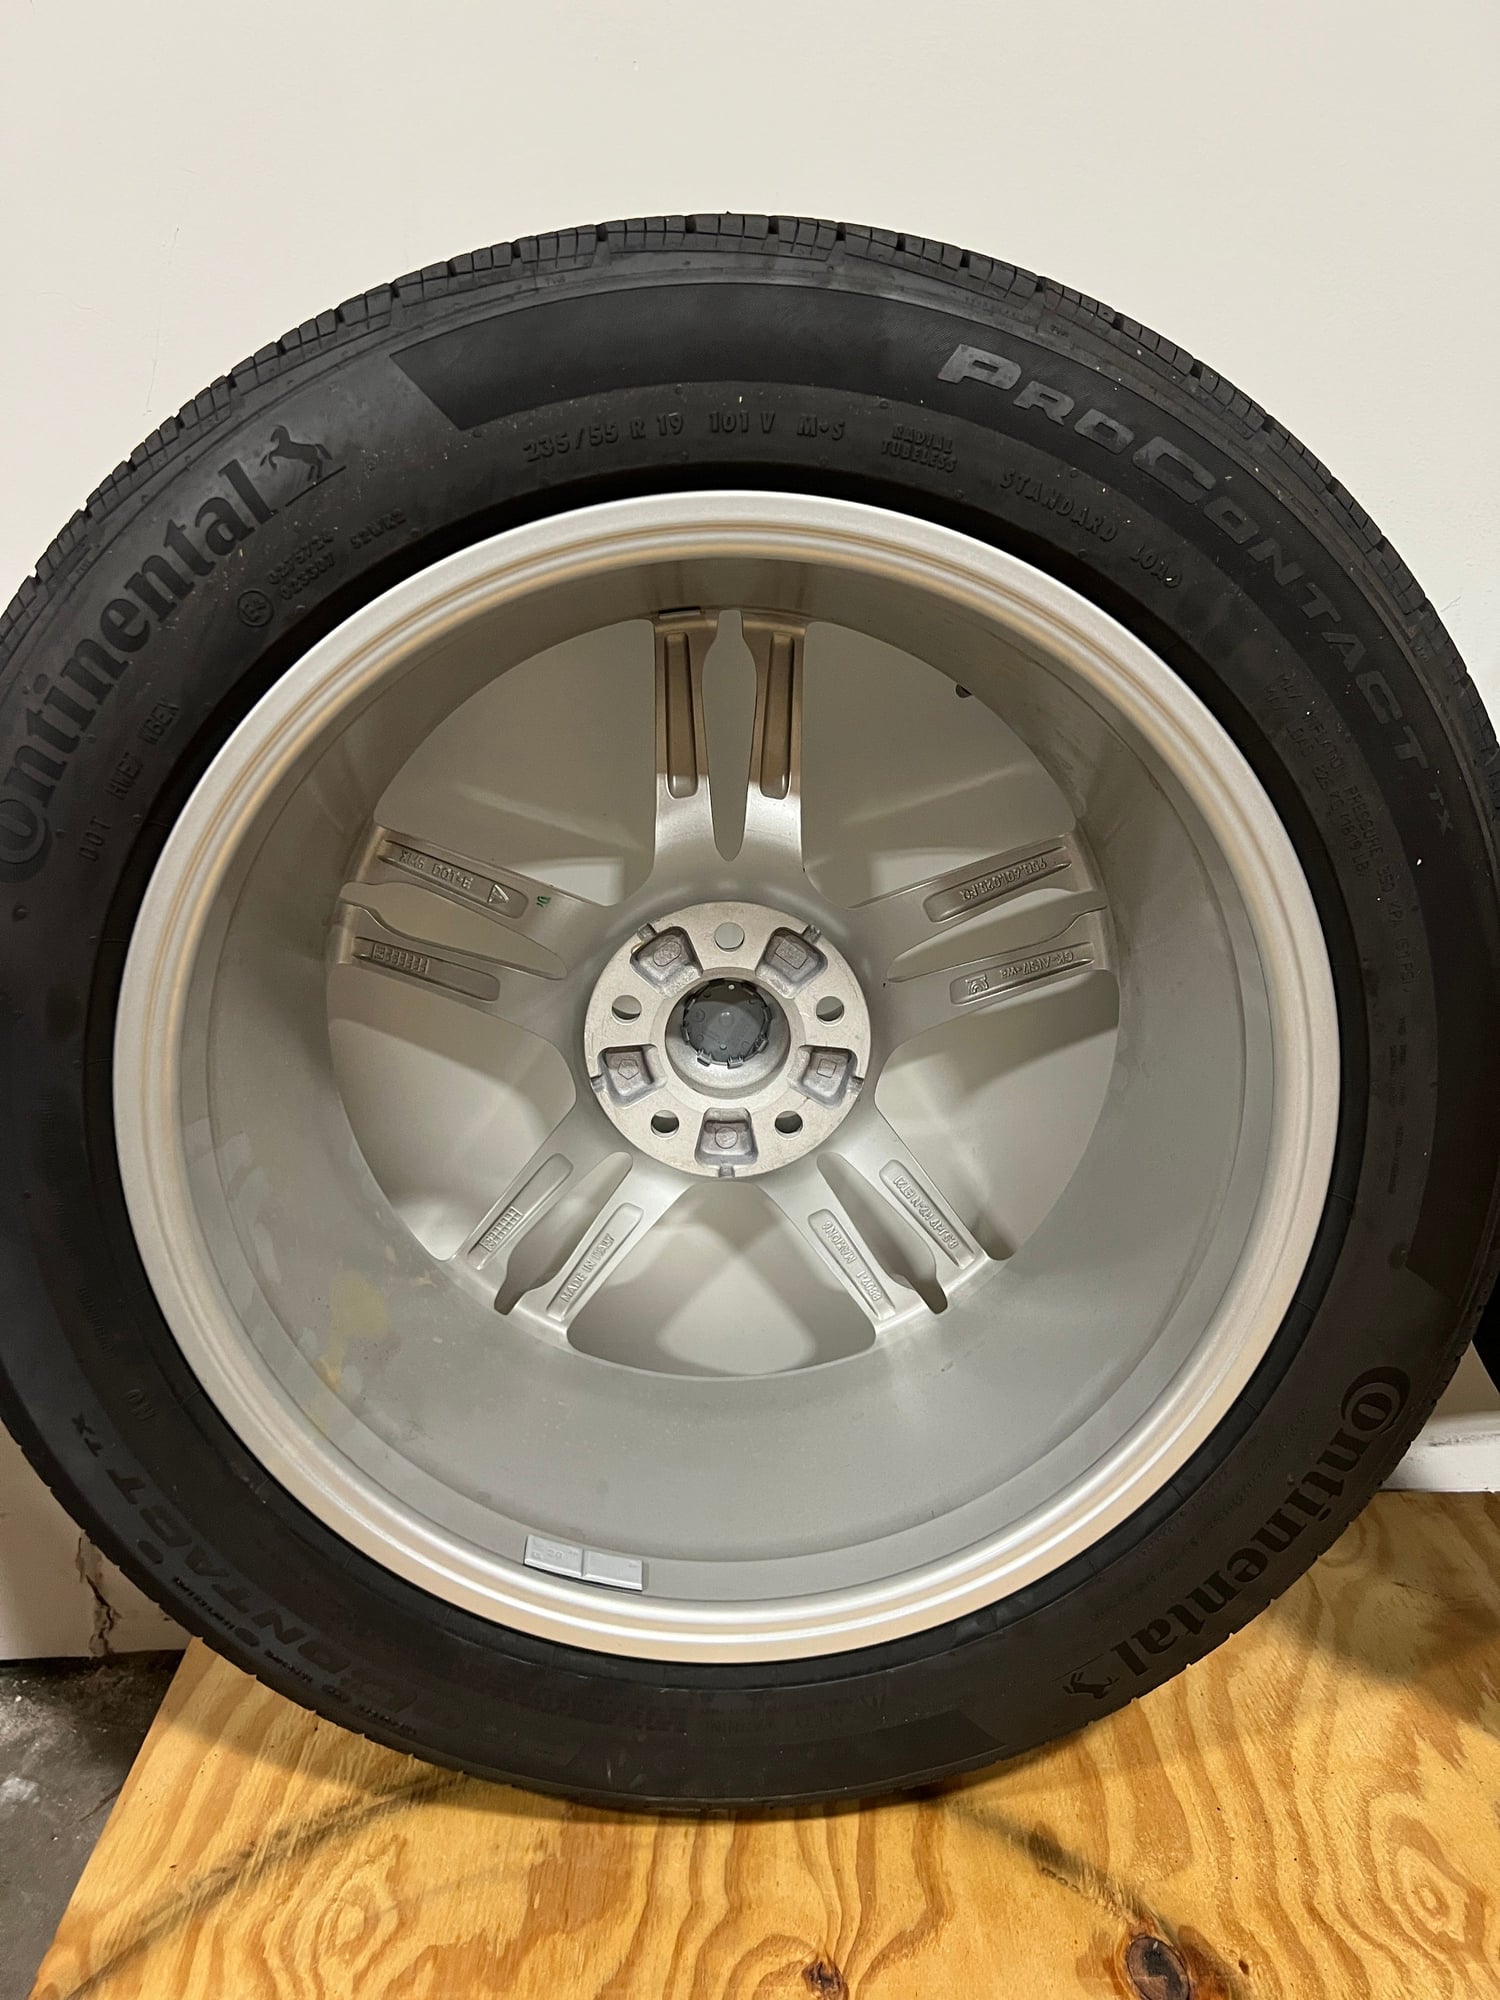 Wheels and Tires/Axles - 2022 Porsche Macan NEW Take-Off Wheels & Tires - New - 2022 Porsche Macan - Ft Lauderdale, FL 33025, United States